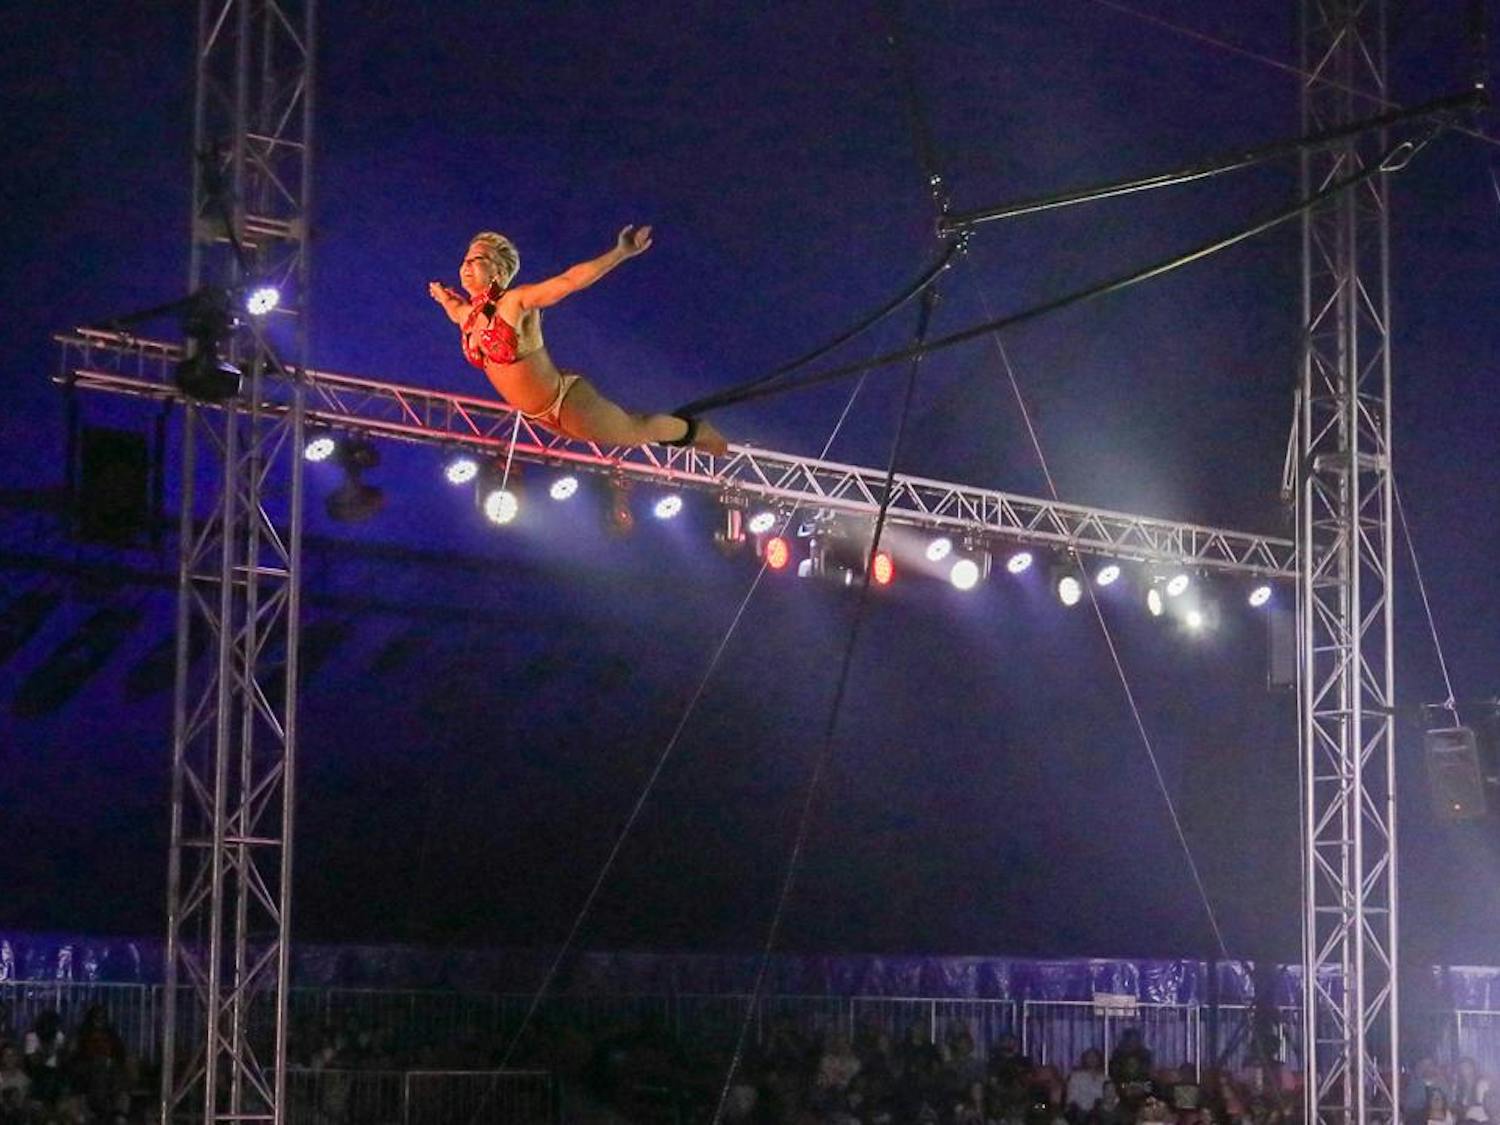 Cloud swing aerialist Susan Vidbel looks at the crowd as she swings back toward the center of the ring during her act at the CIRCUS at the Fair on Oct. 20, 2023. Vidbel's act involves her conducting a series of aerial acrobatics as she swings back and forth above the ring. 